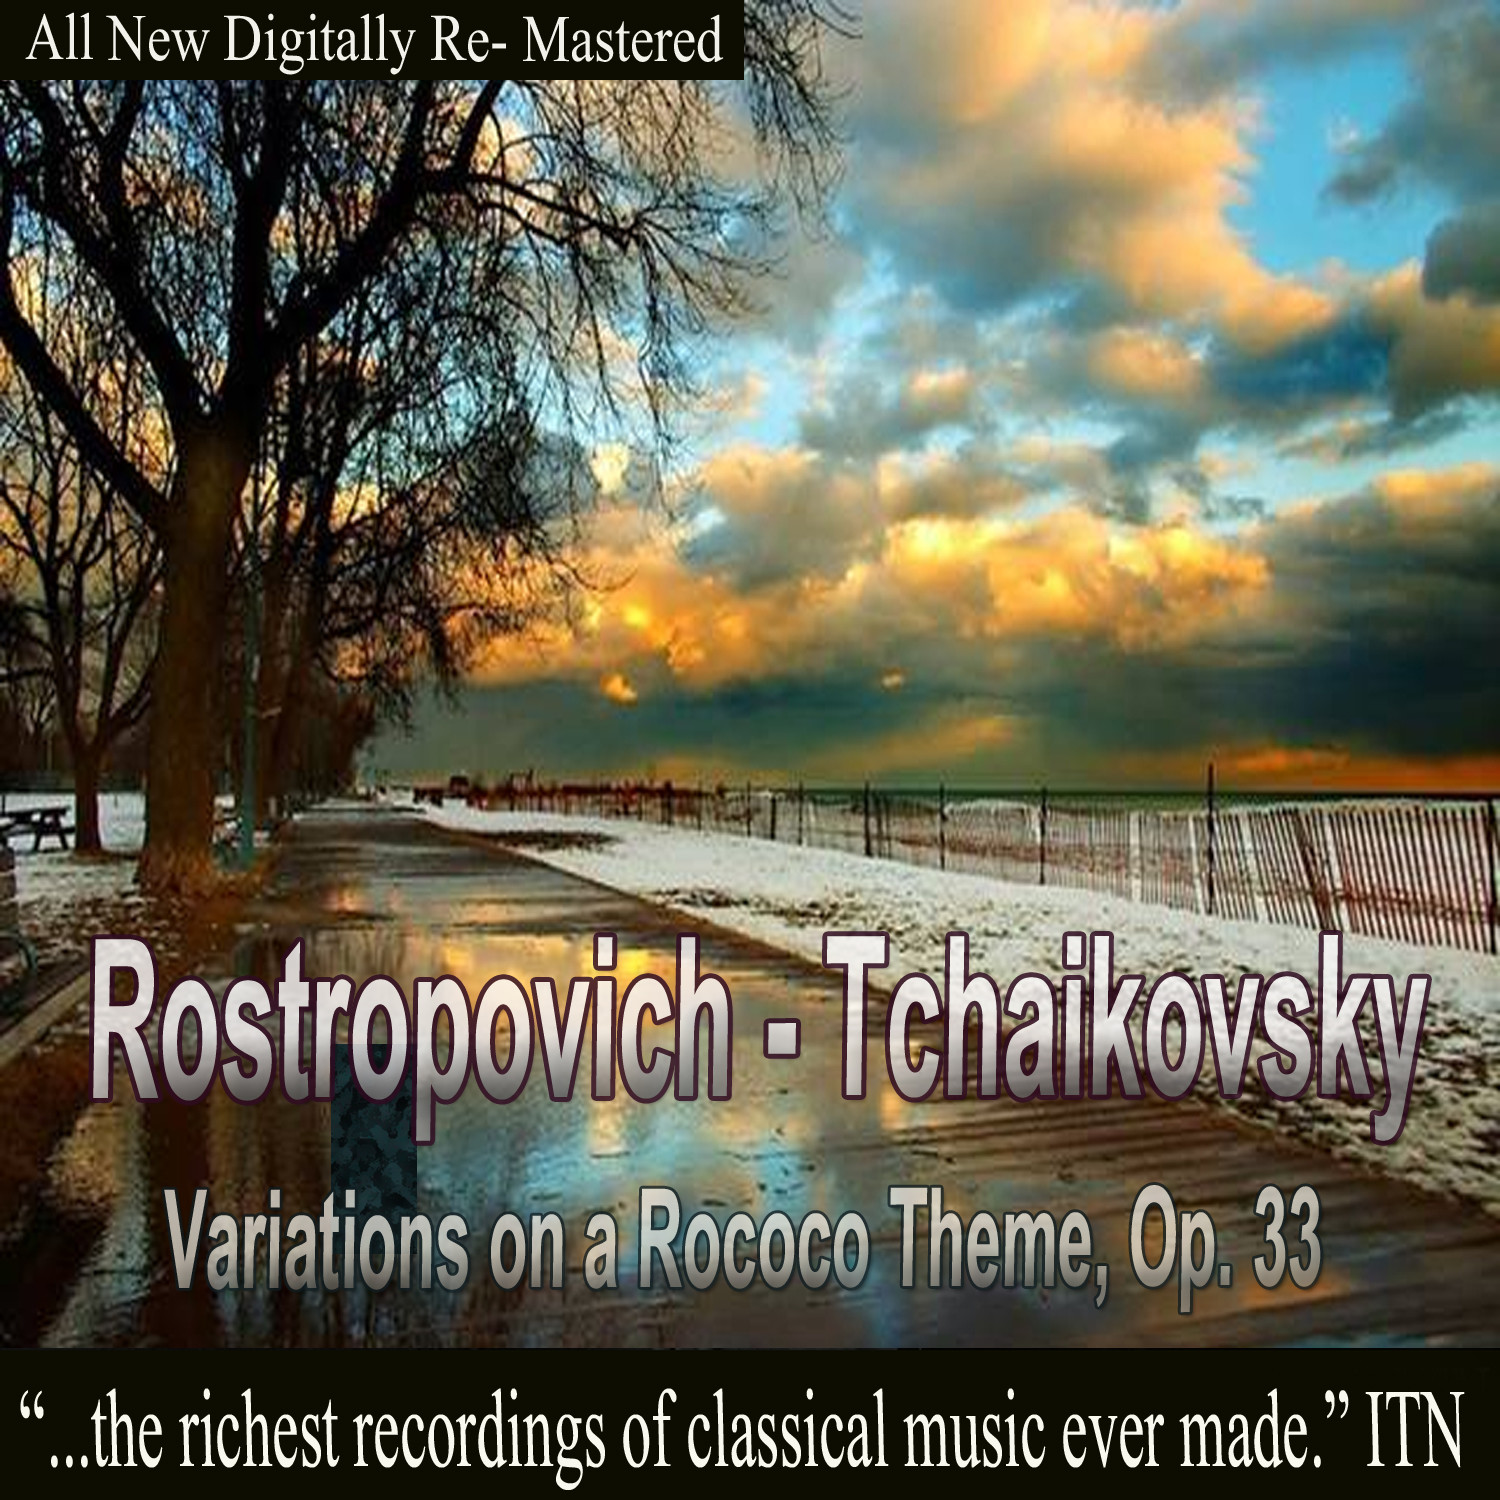 Rostropovich - Tchaikovsky, Variations on a Rococo Theme, Op. 33